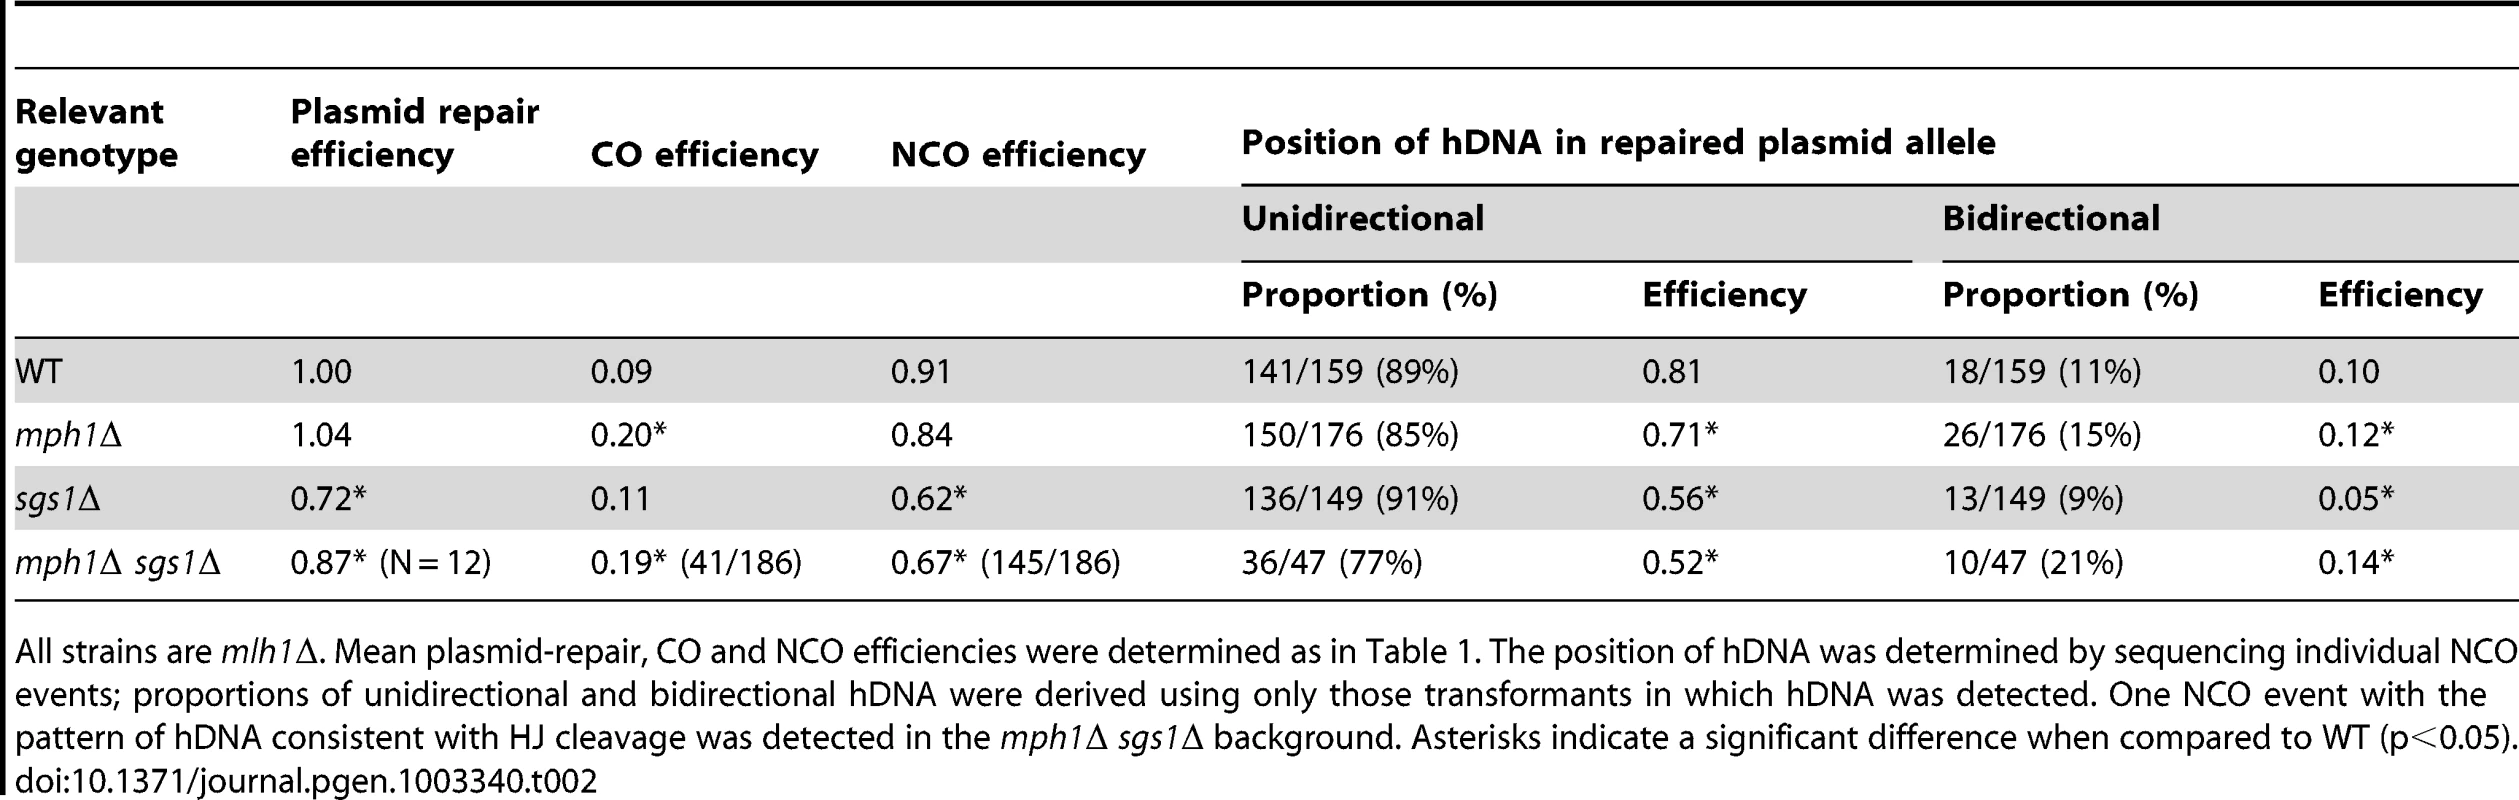 Efficiency of NCO events with unidirectional versus bidirectional hDNA in the repaired plasmid allele.